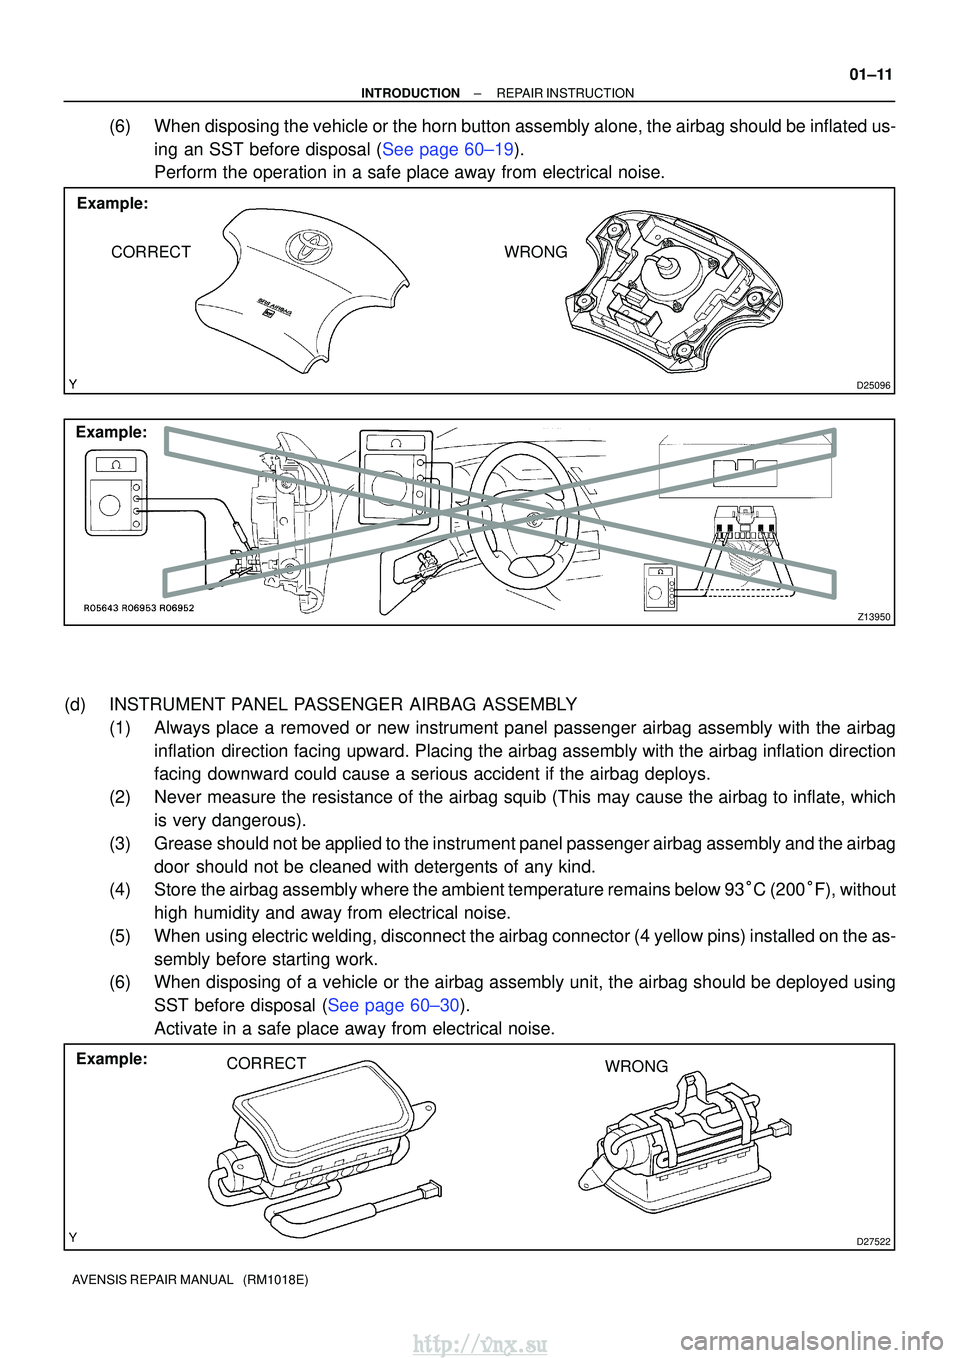 TOYOTA AVENSIS 2003  Service Repair Manual D25096
Example:CORRECTWRONG
Z13950
Example:
D27522
Example: CORRECT WRONG
±
INTRODUCTIONREPAIR INSTRUCTION
01±11
AVENSIS REPAIR MANUAL   (RM1018E)
(6)When disposing the vehicle or the horn button as